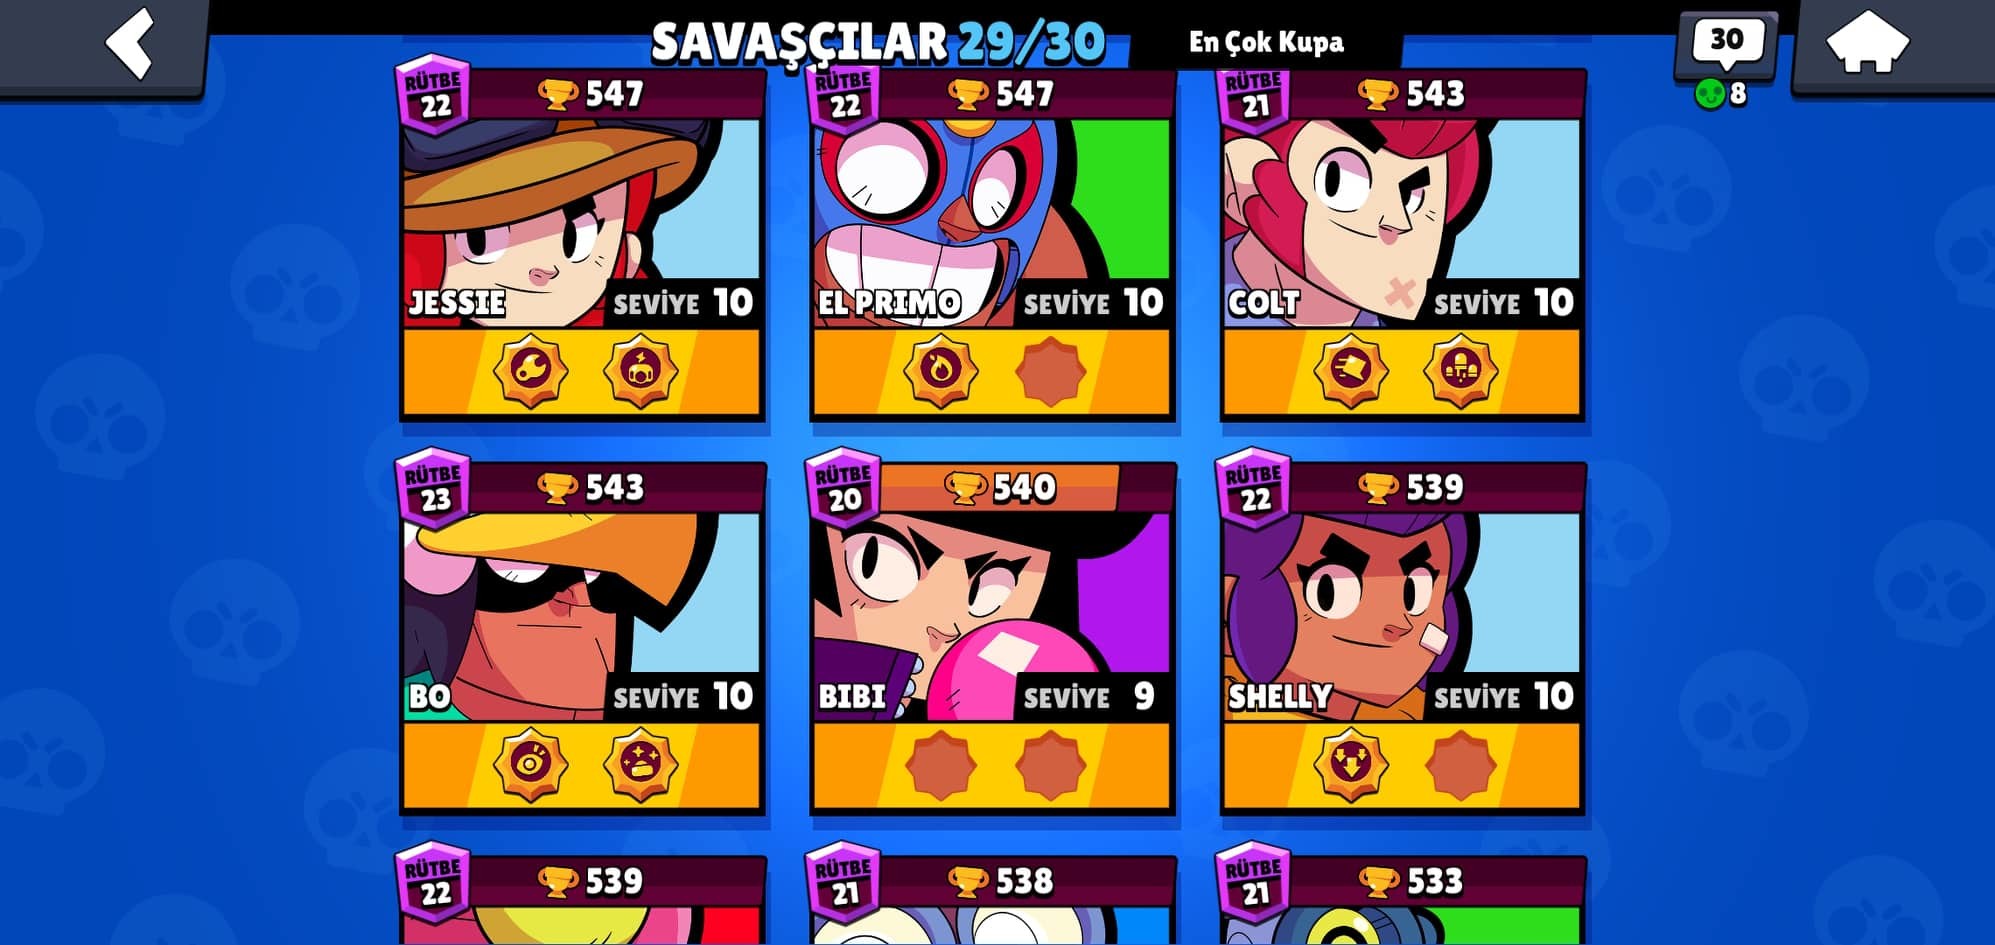 Sold Brawl Stars Level 142 Highest Trophie 15616 27 Card 10 Level 29 Card All Cards 20 Rank Playerup Worlds Leading Digital Accounts Marketplace - brawl stars.27 10